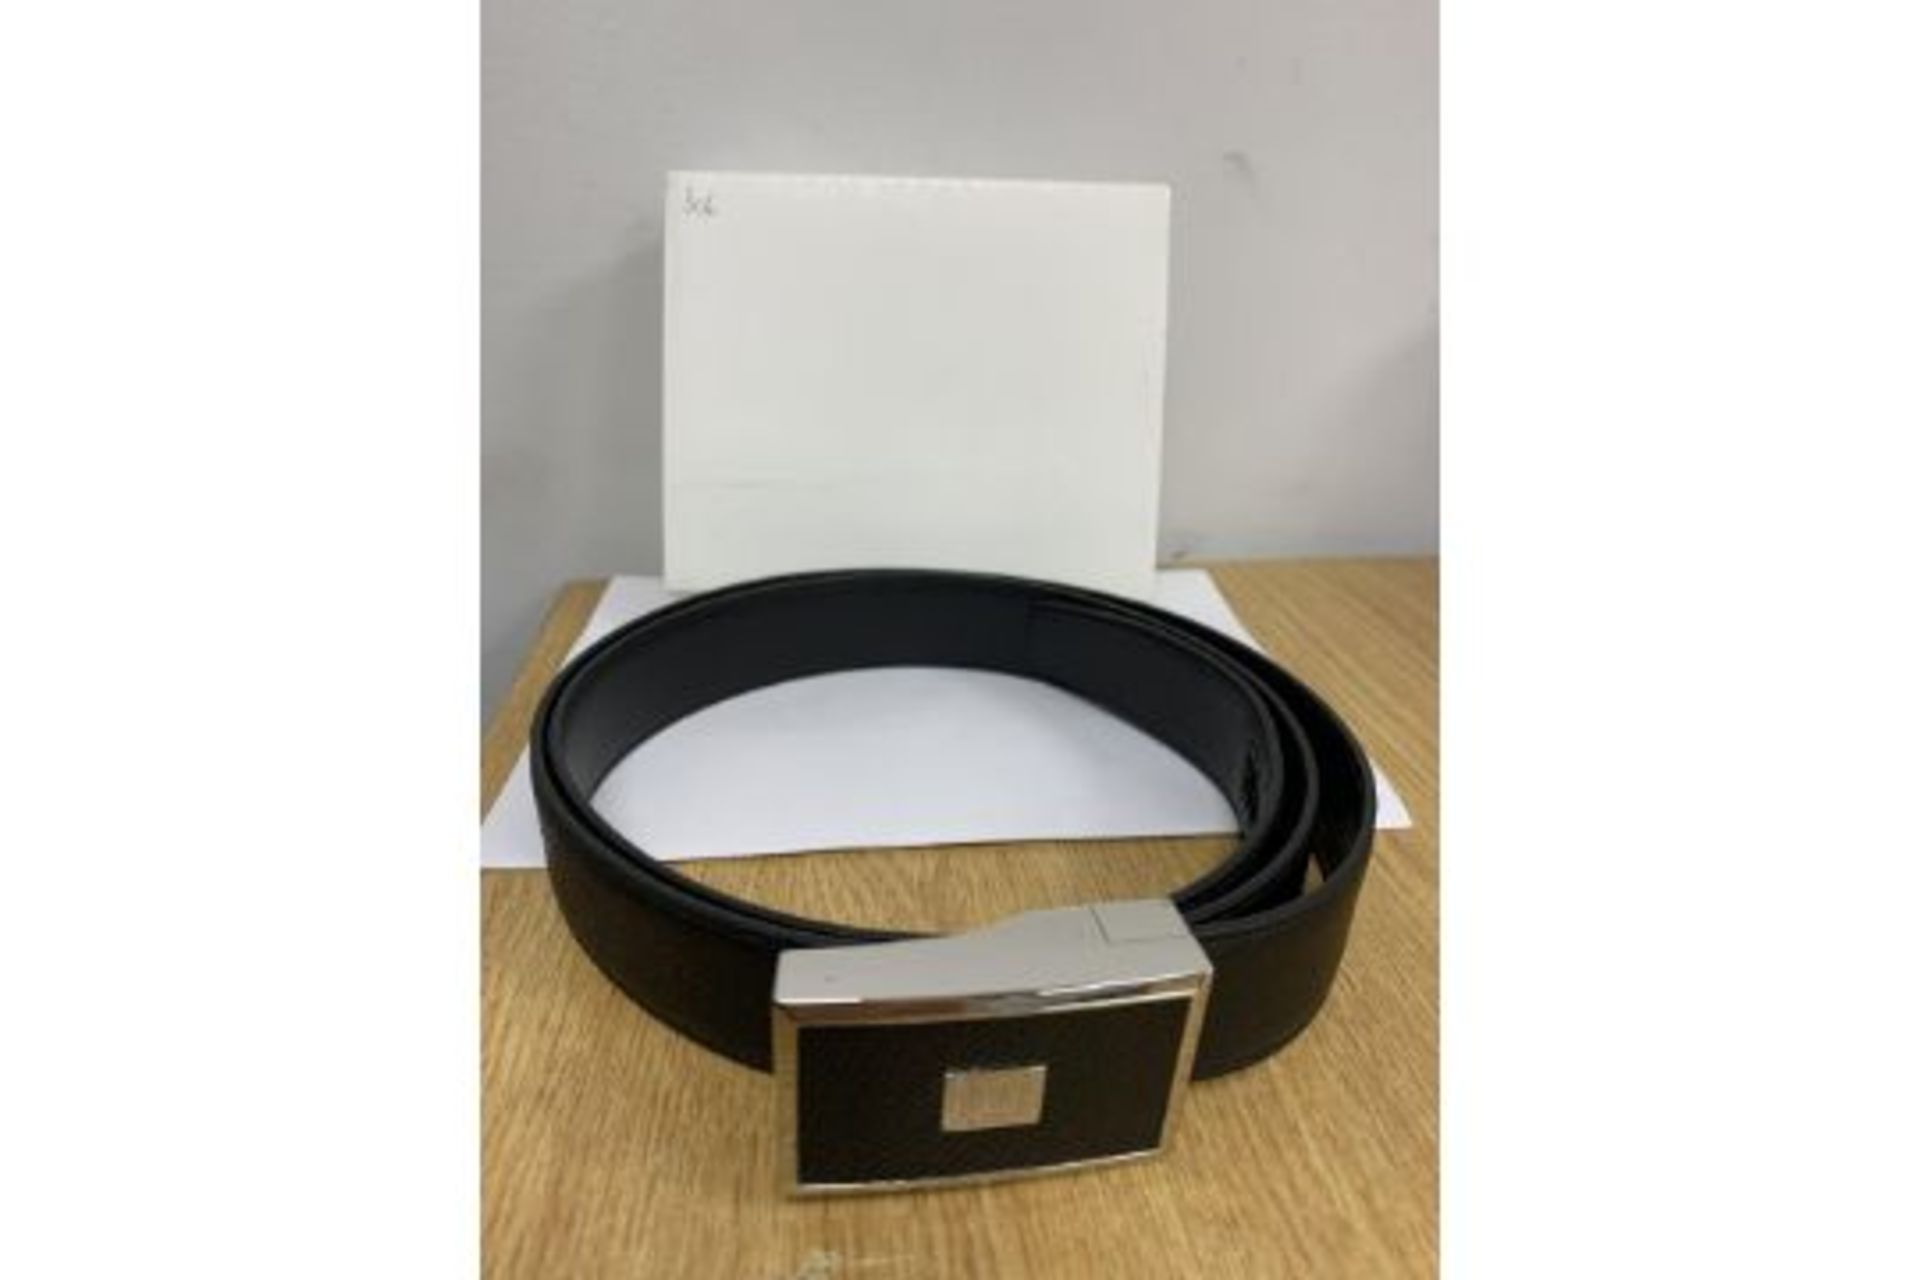 BRAND NEW ALFRED DUNHILL Gt Belt, BLACK 42 (095) RRP £285- 10